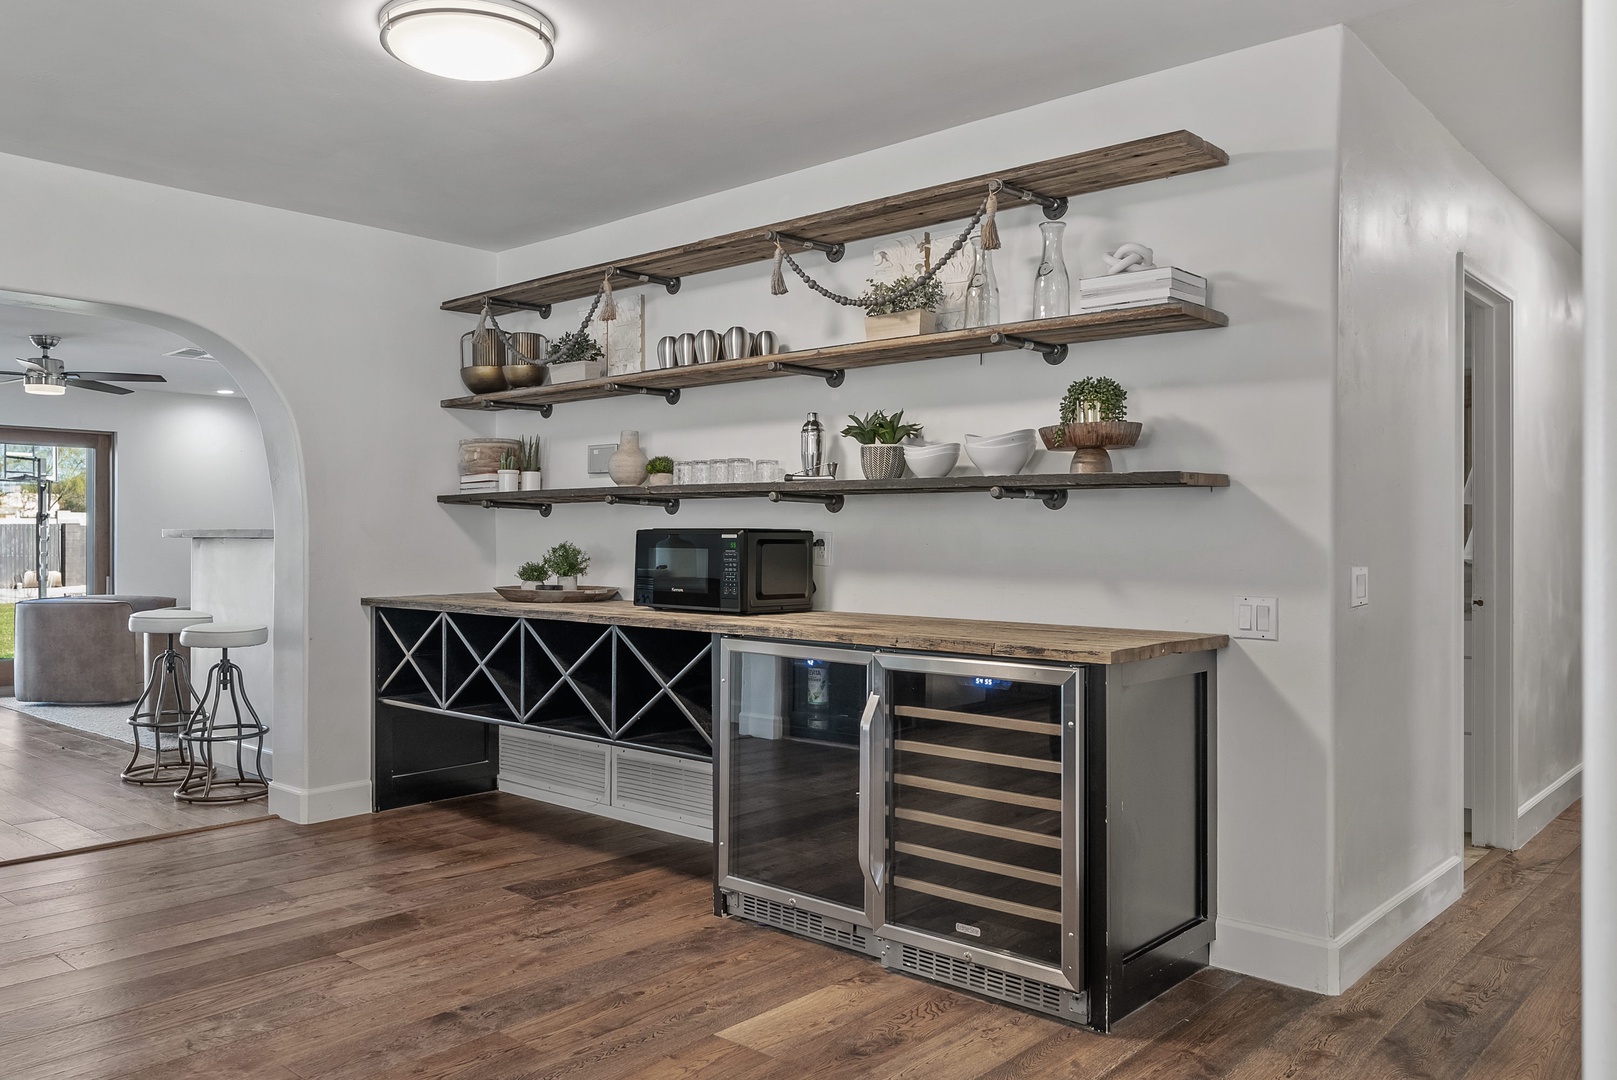 Dining and kitchen area with booth-style seating and full culinary amenities